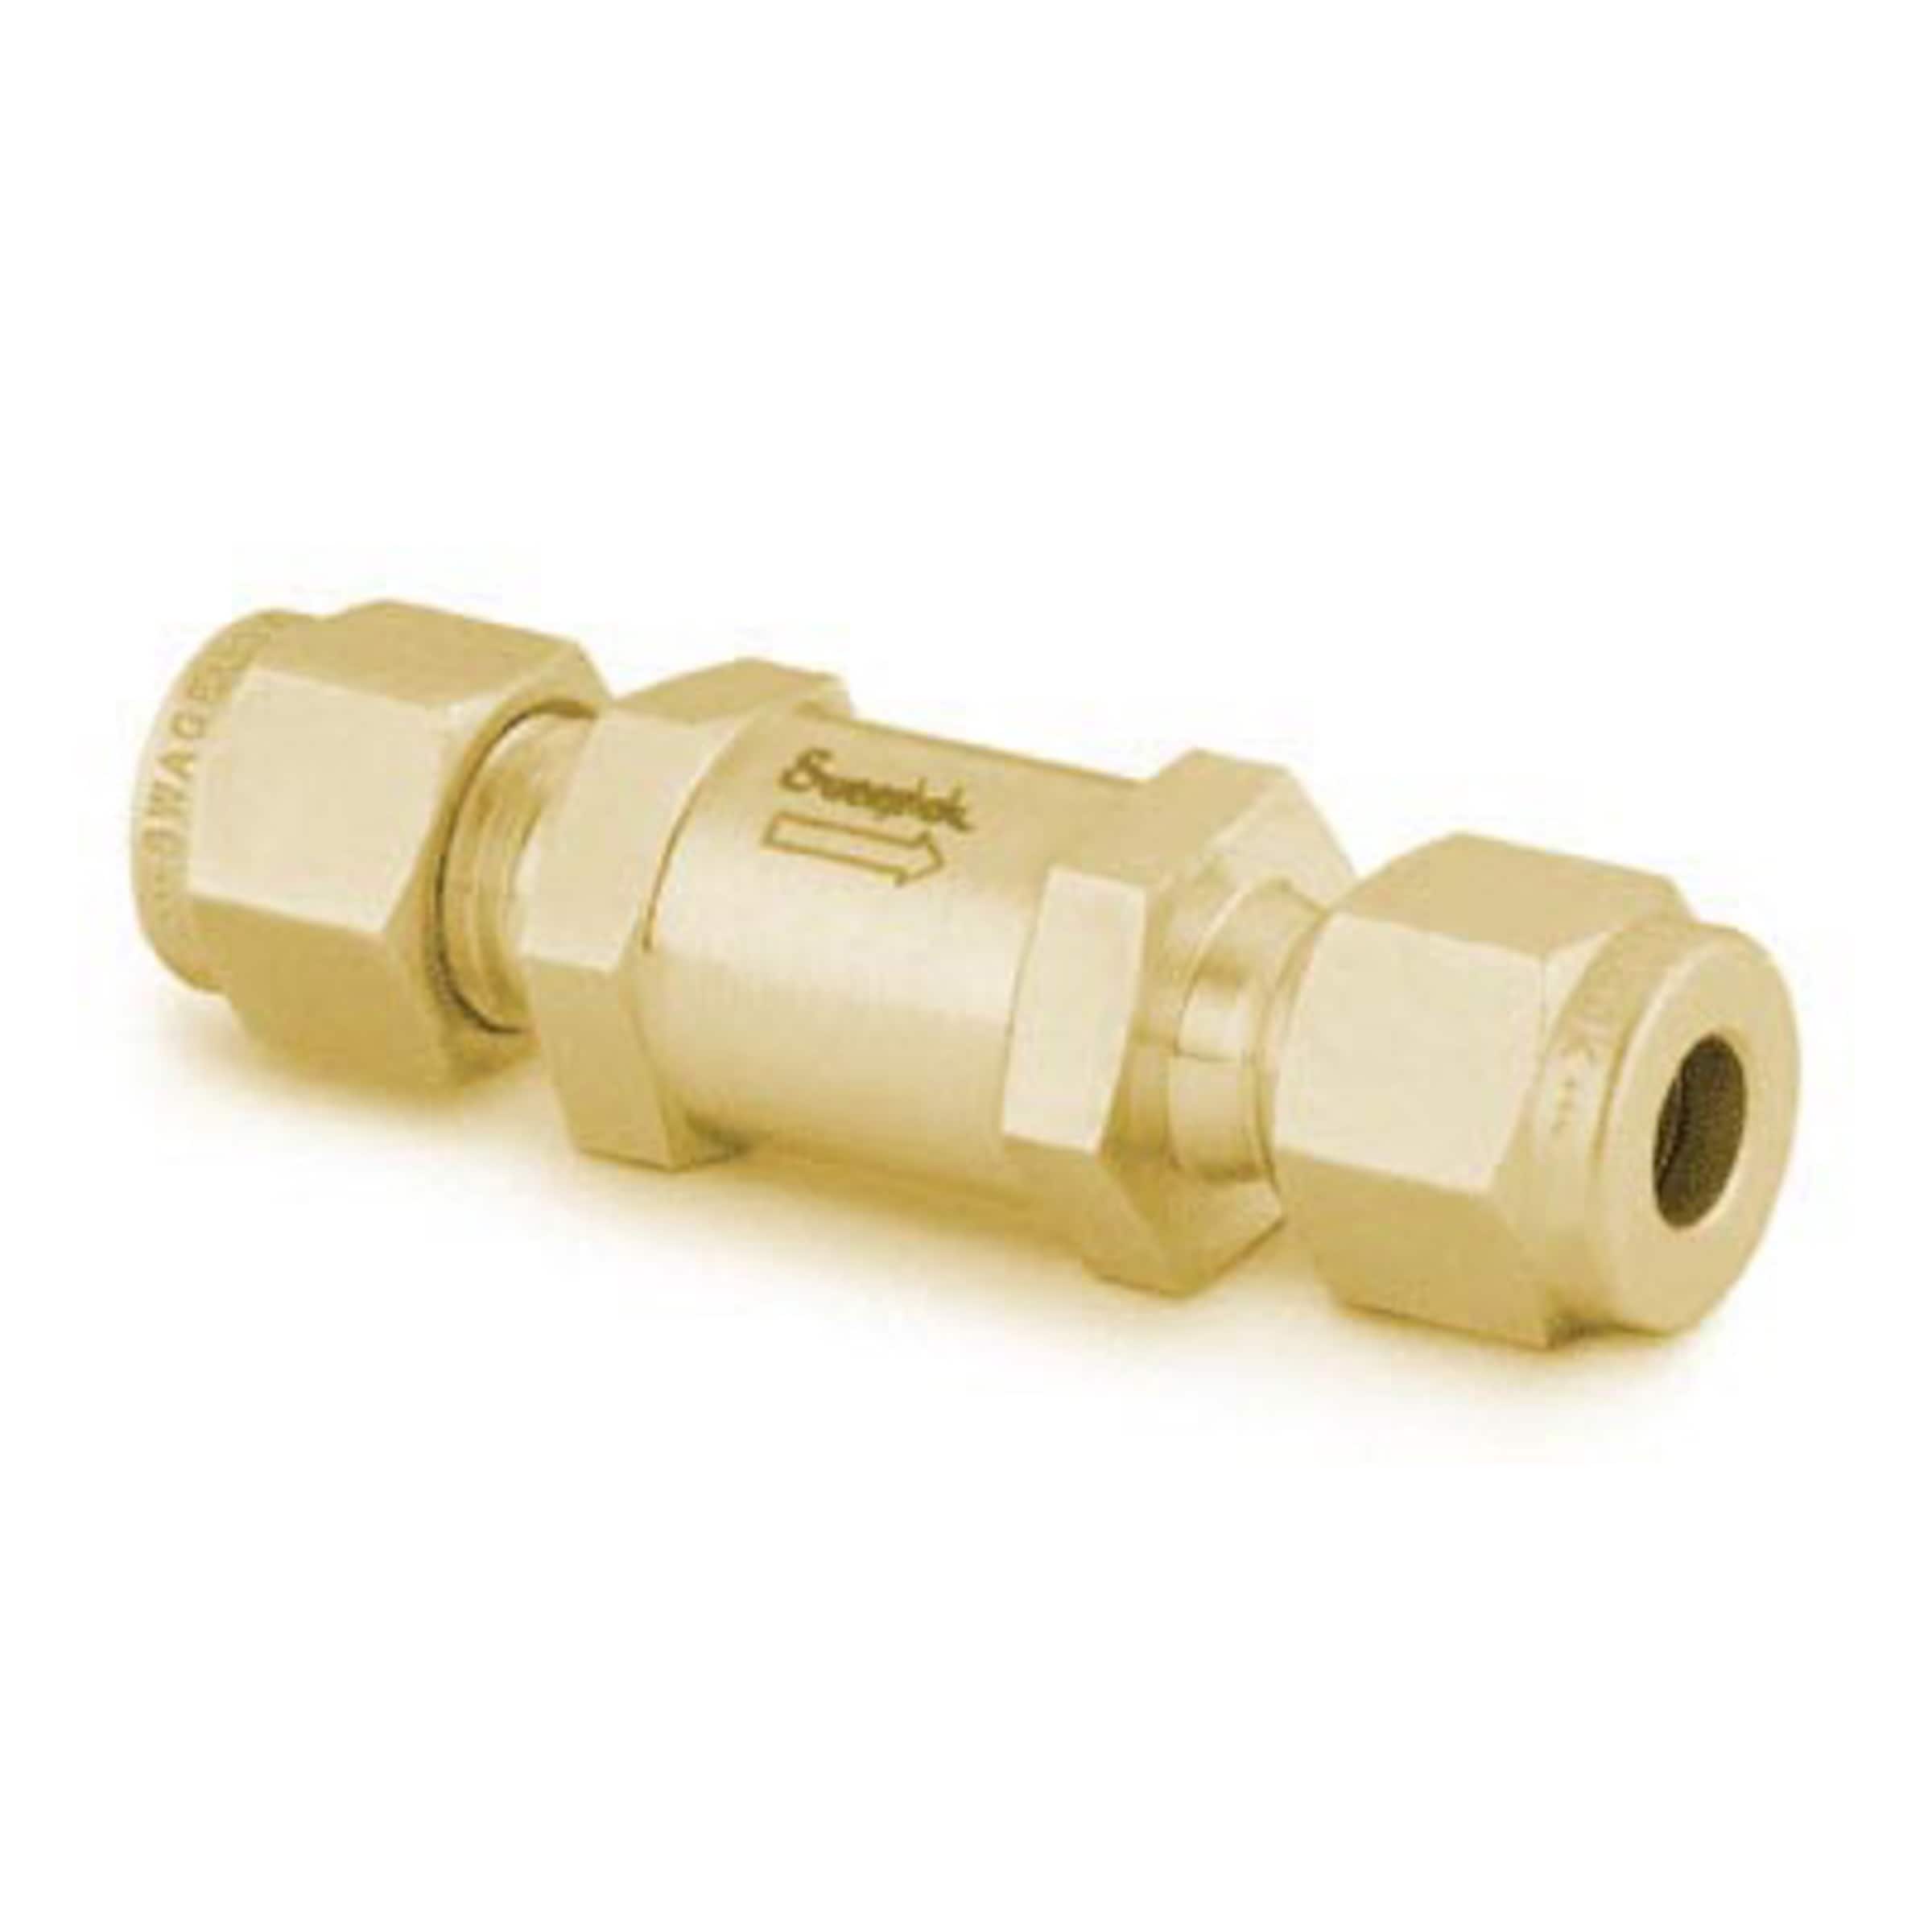 Brass Swagelok Tube Fitting, Male Elbow, 1/4 in. Tube OD x 1/4 in. Male NPT, Male Connectors, Tube Fittings and Adapters, Fittings, All Products